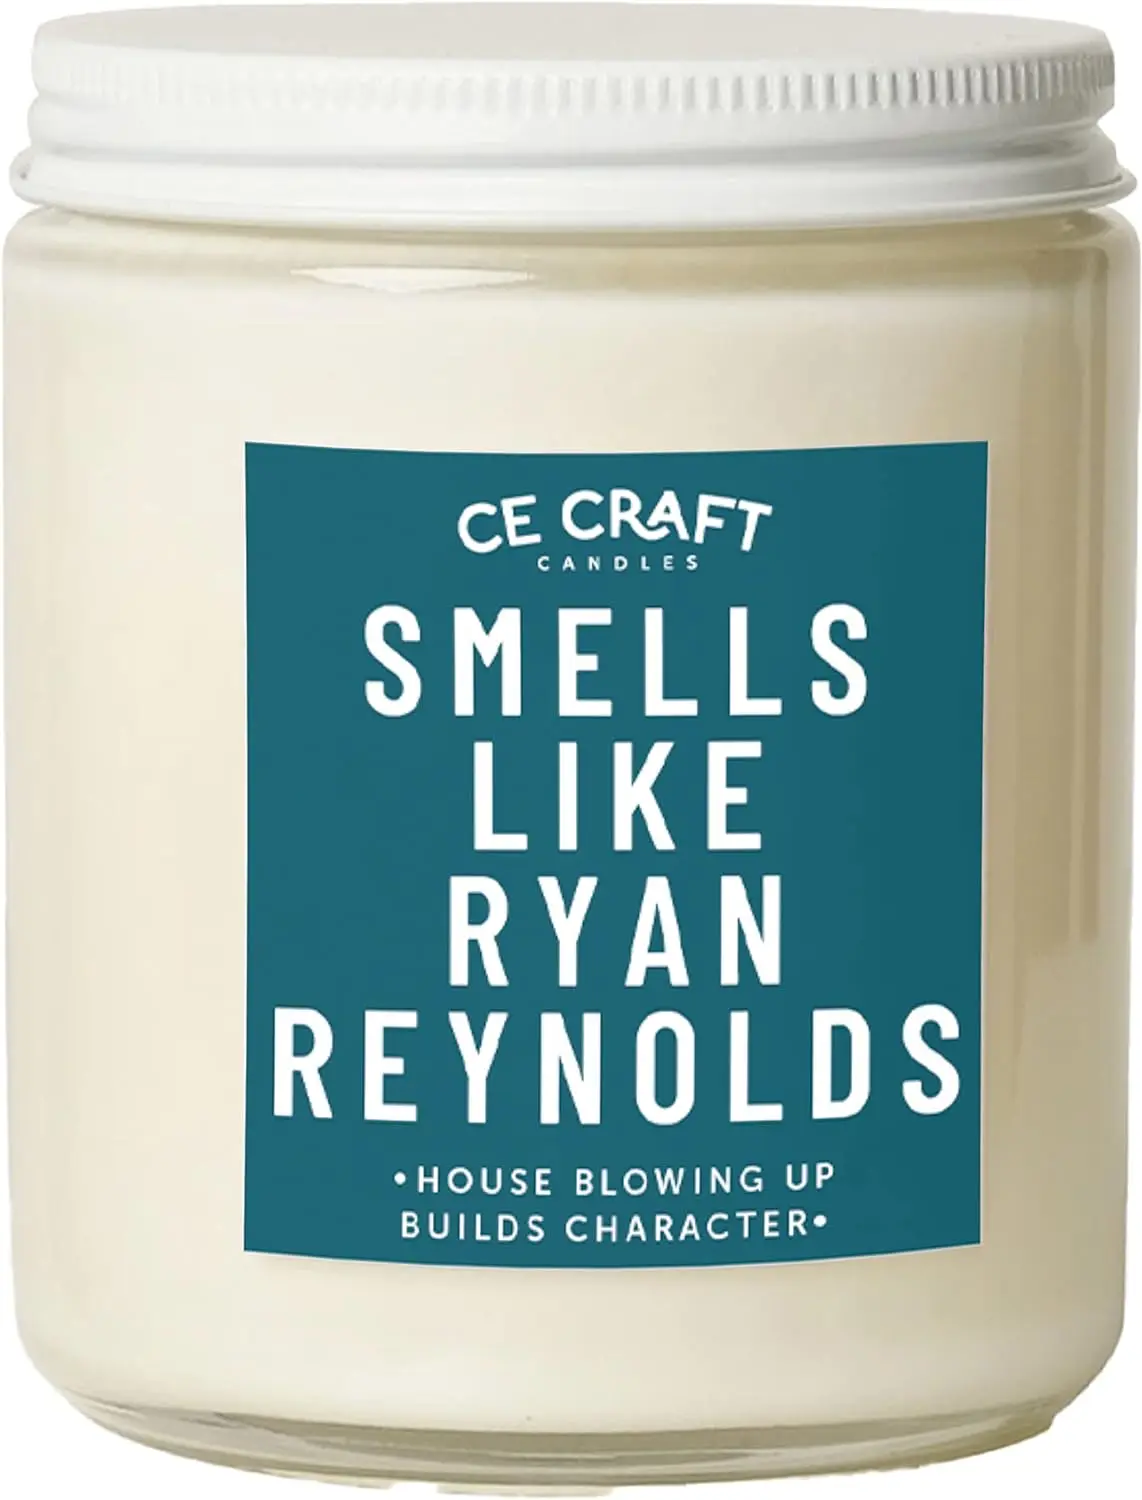 

Like Ryan Reynolds Candle - Midnight Musk Scented Gifts, Gift for Her, Prayer Candle, Scented Soy Wax Candle for Home | 9oz Clea